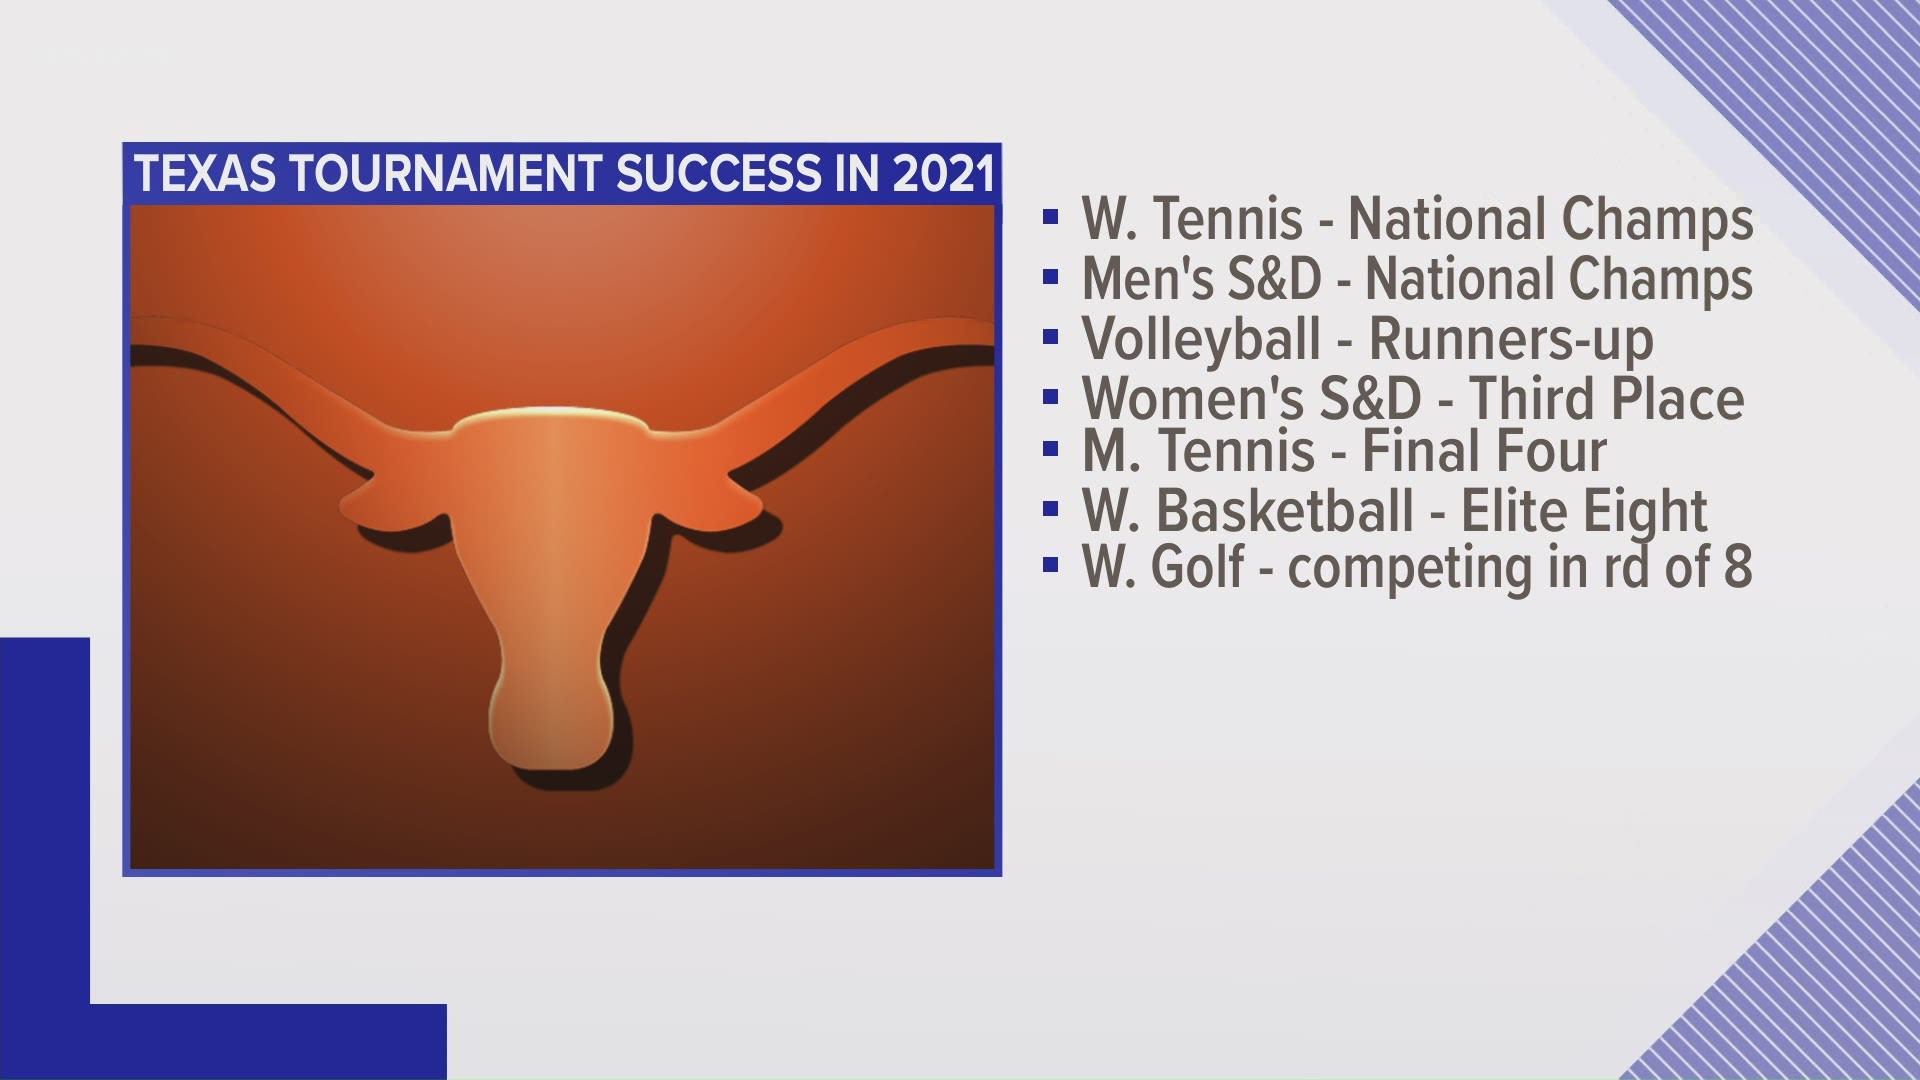 It's been an absolutely dominant spring for Texas sports.